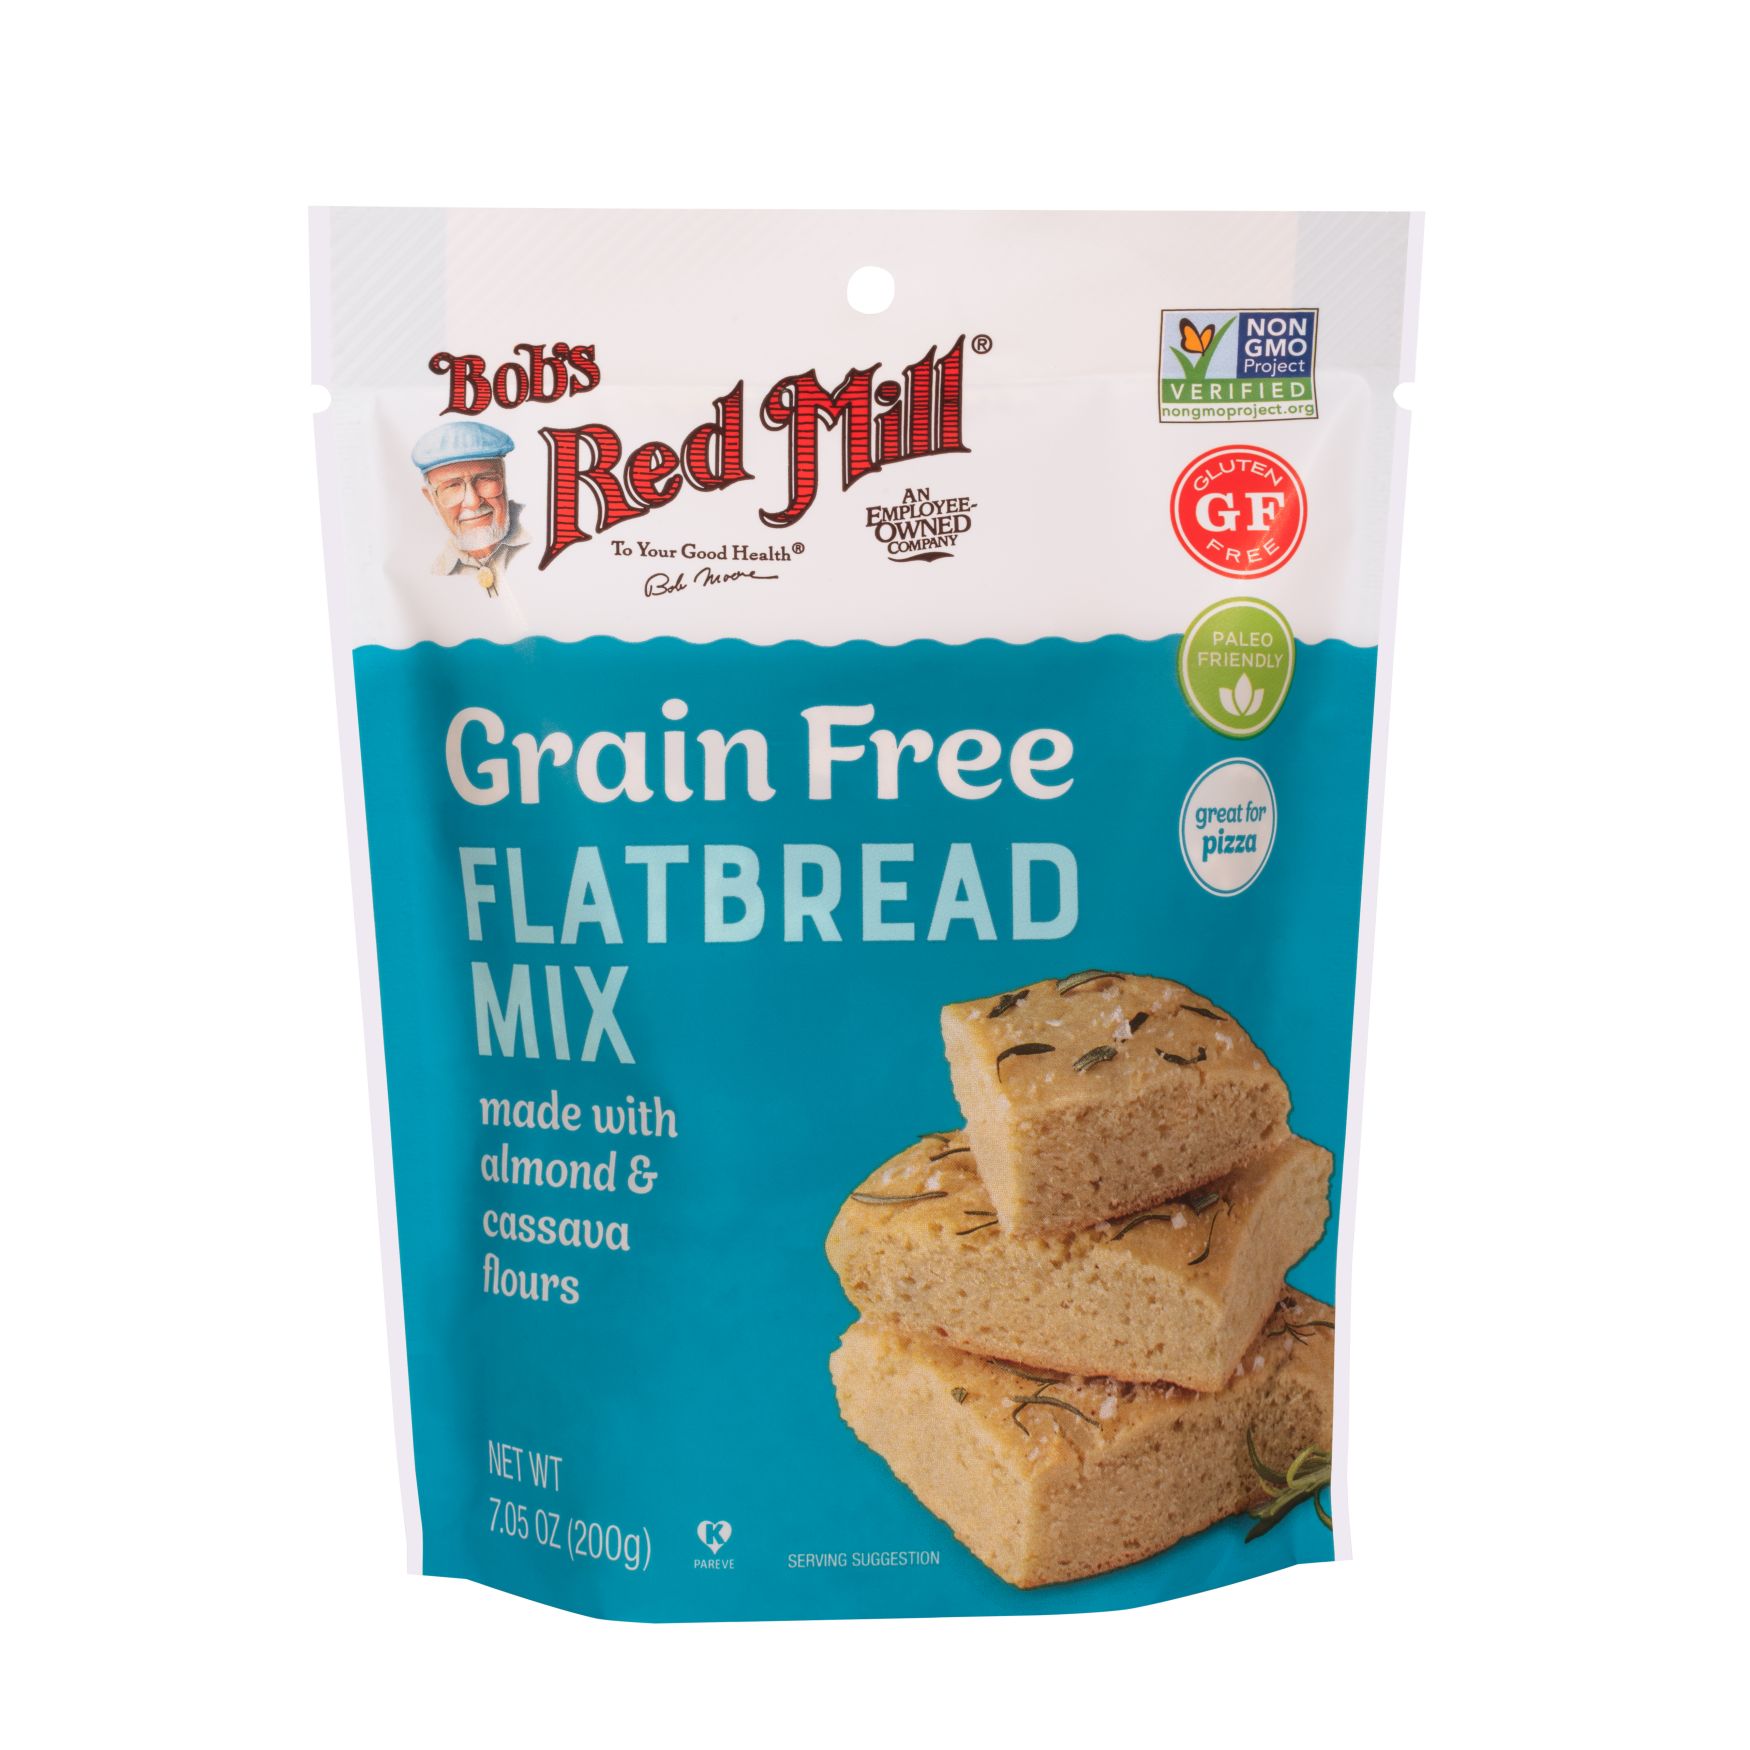 Grain Free Flatbread Mix :: Red Mill Natural Foods